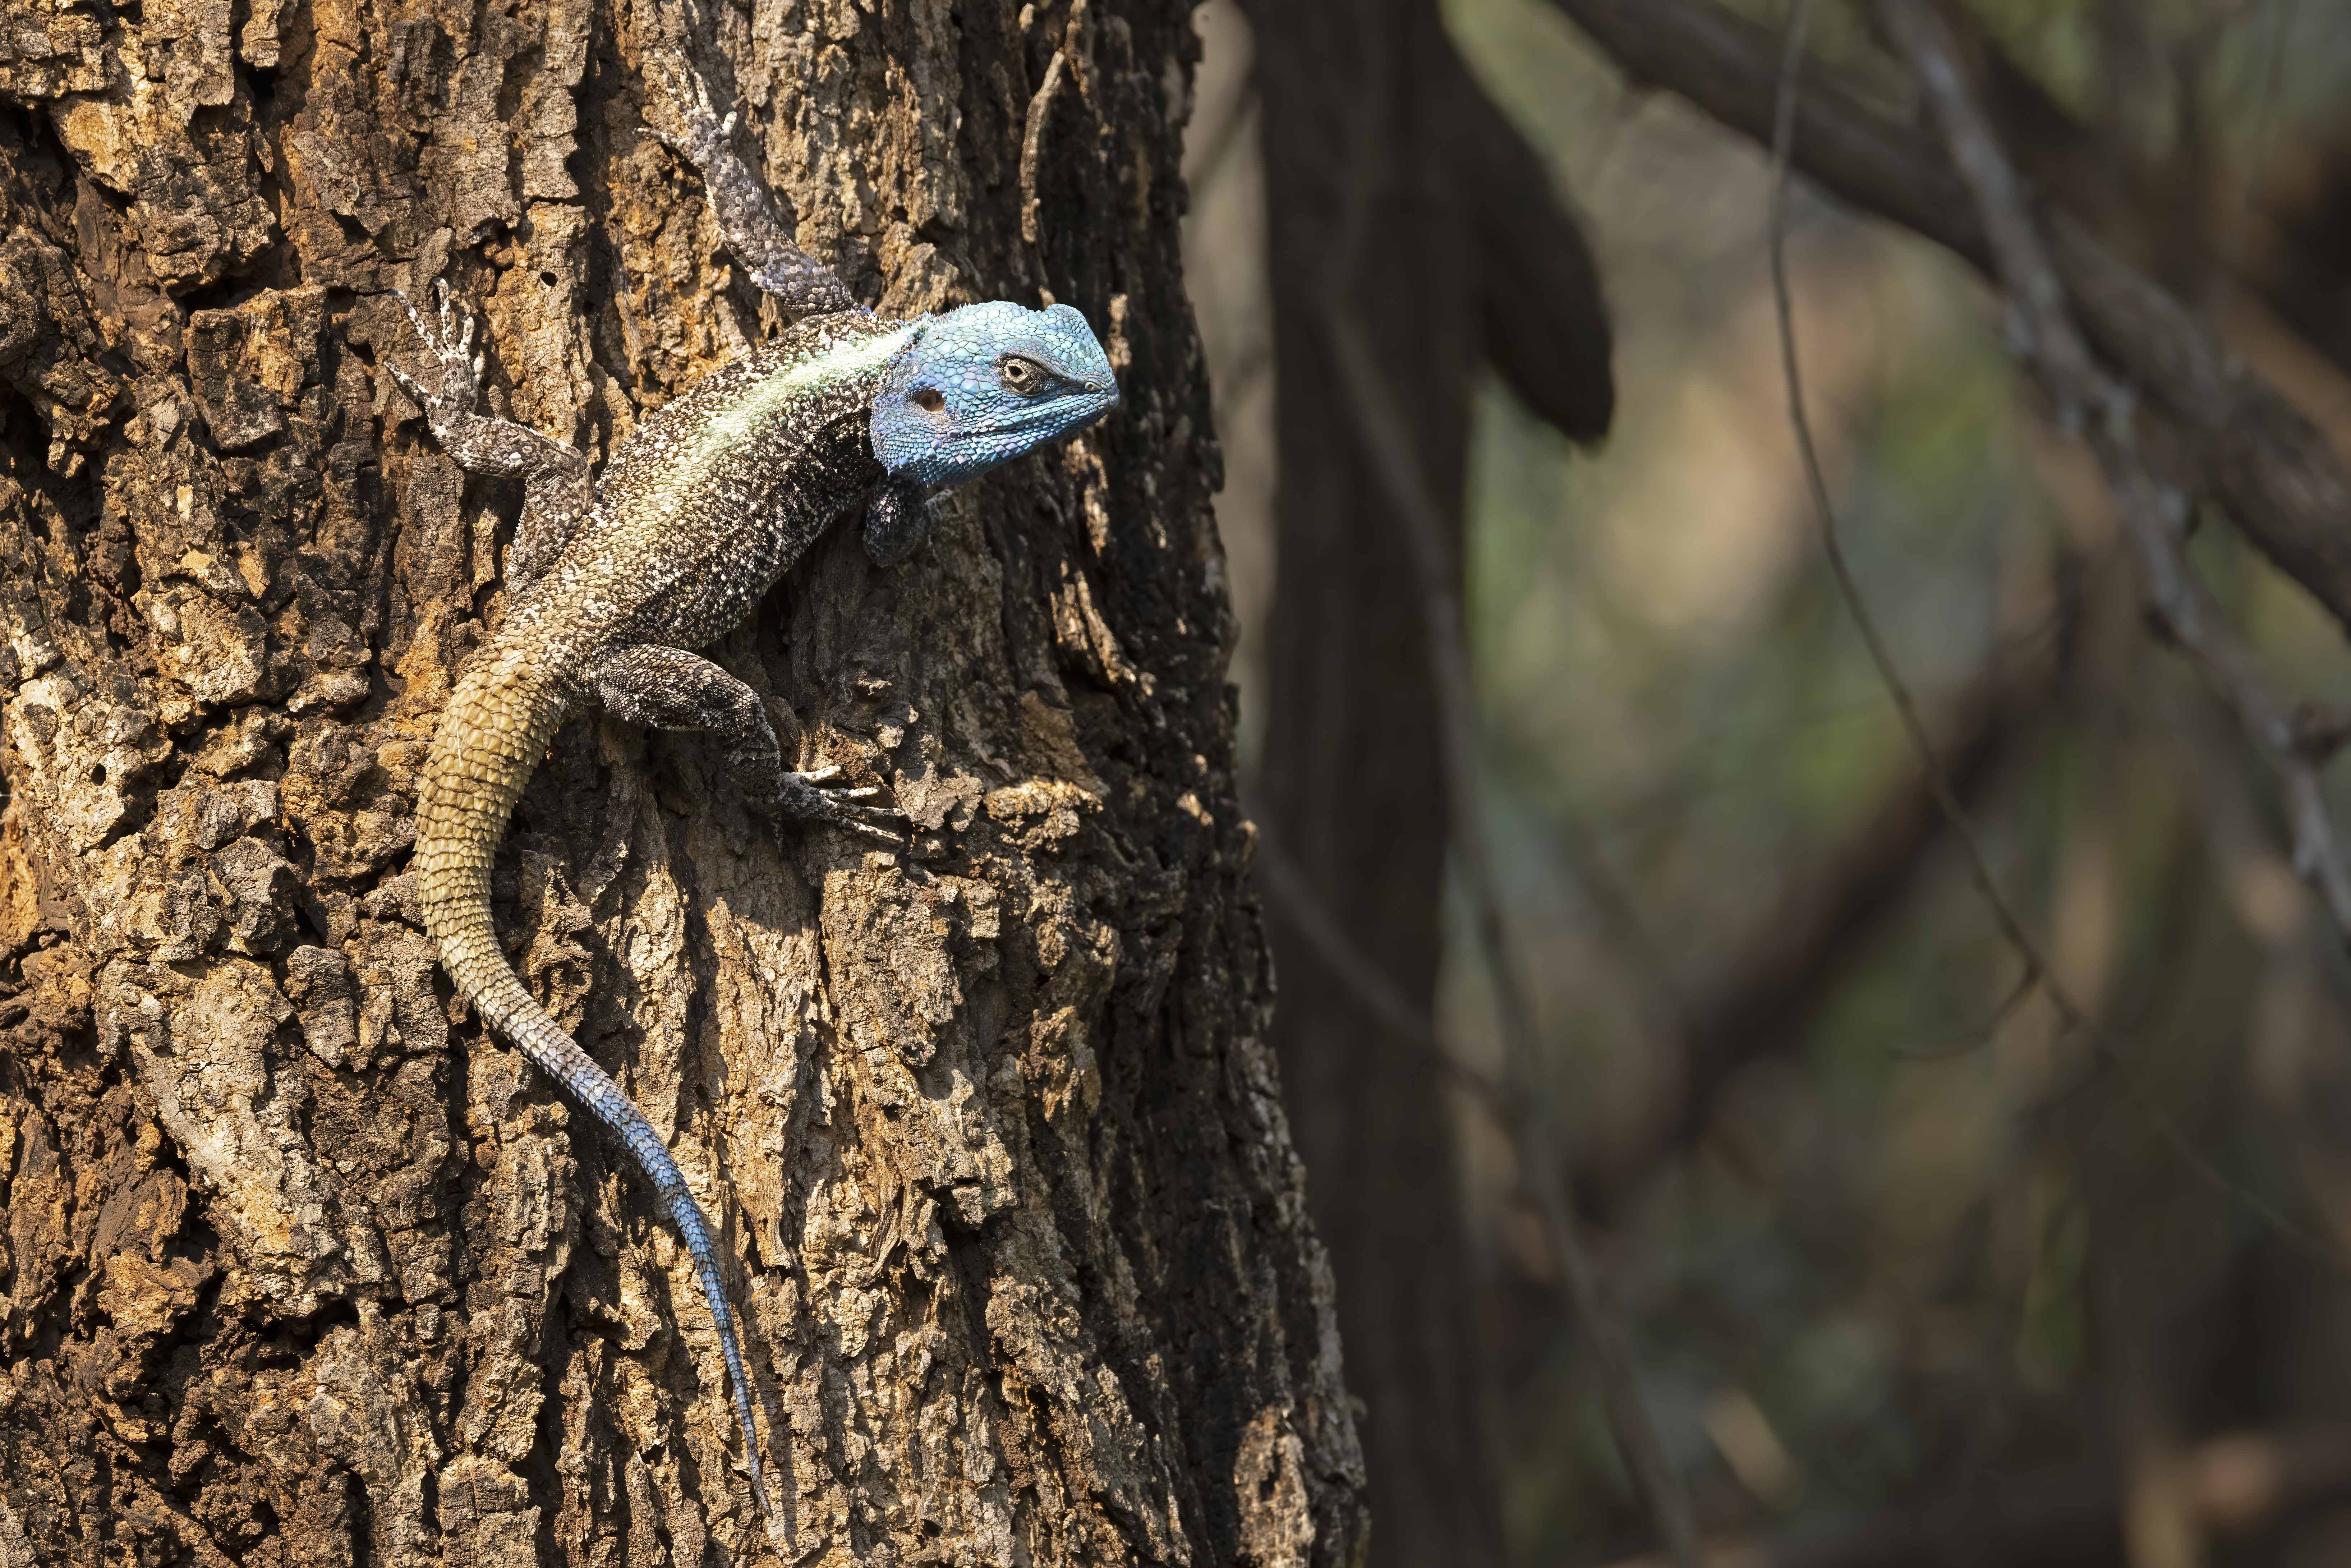 Southern Tree Agama Lizard.   South Africa